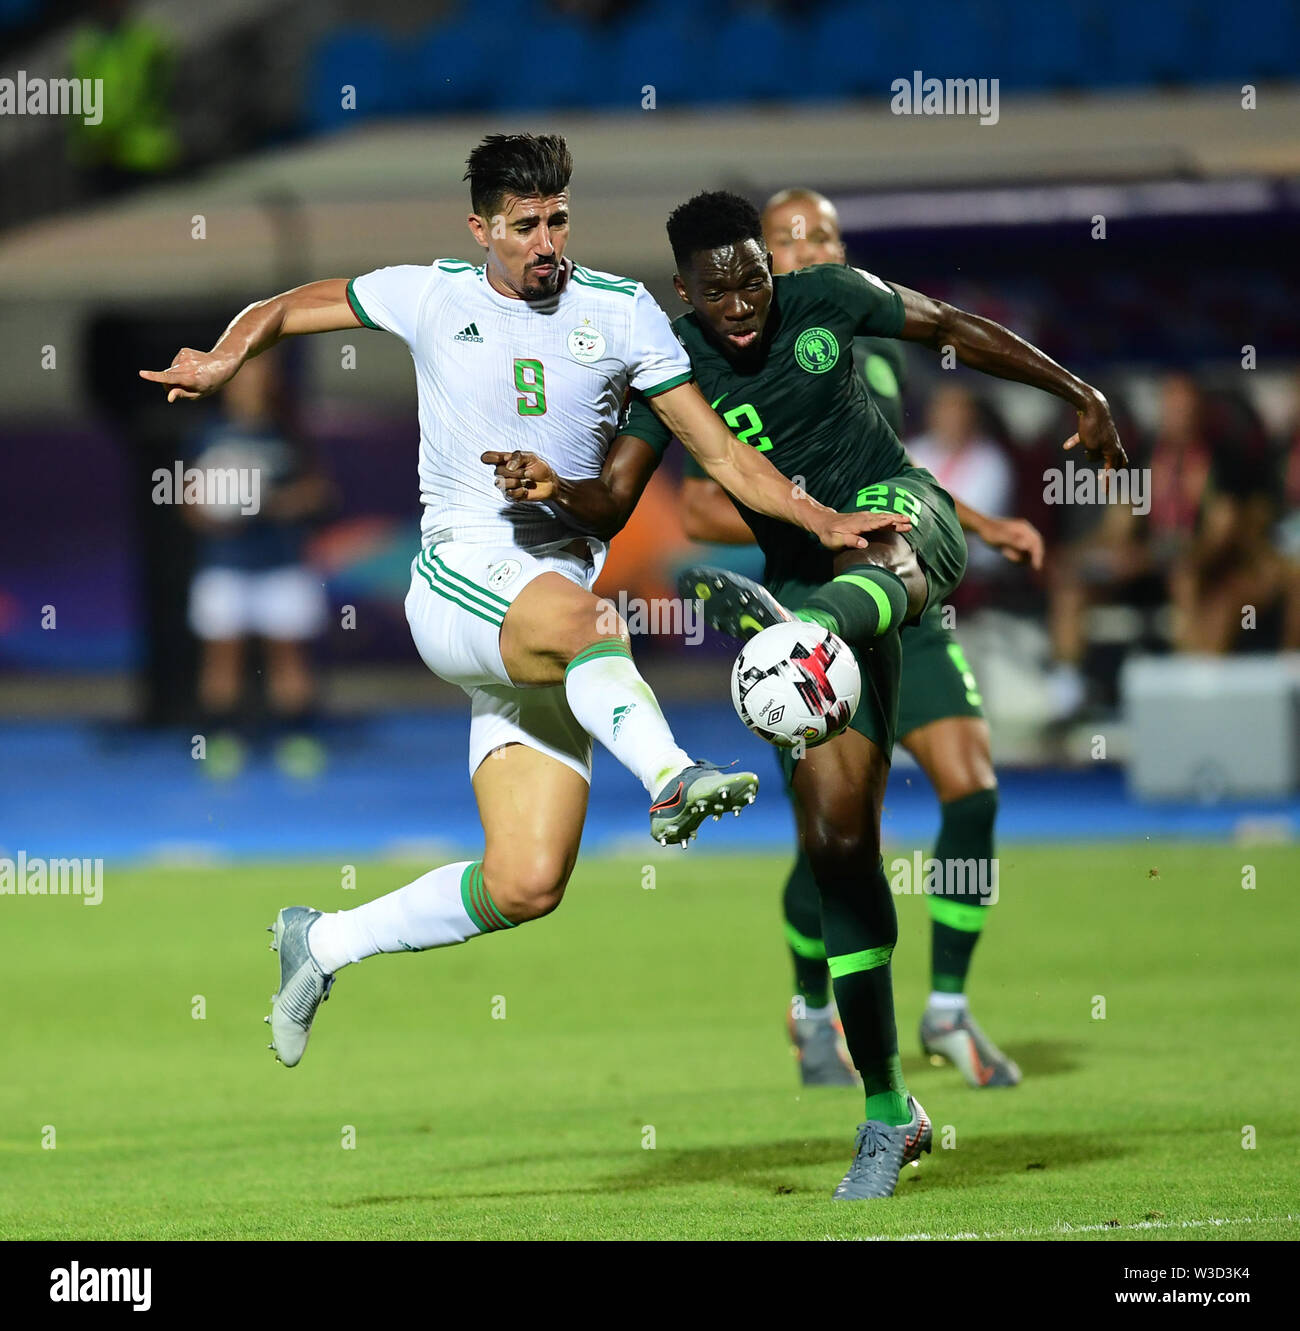 Cairo. 14th July, 2019. Baghdad Bounedjah (L) of Algeria vies with Kenneth Omeruo of Nigeria during the semifinal match between Algeria and Nigeria at the 2019 Africa Cup of Nations in Cairo, Egypt on July 14, 2019. Credit: Wu Huiwo/Xinhua/Alamy Live News Stock Photo